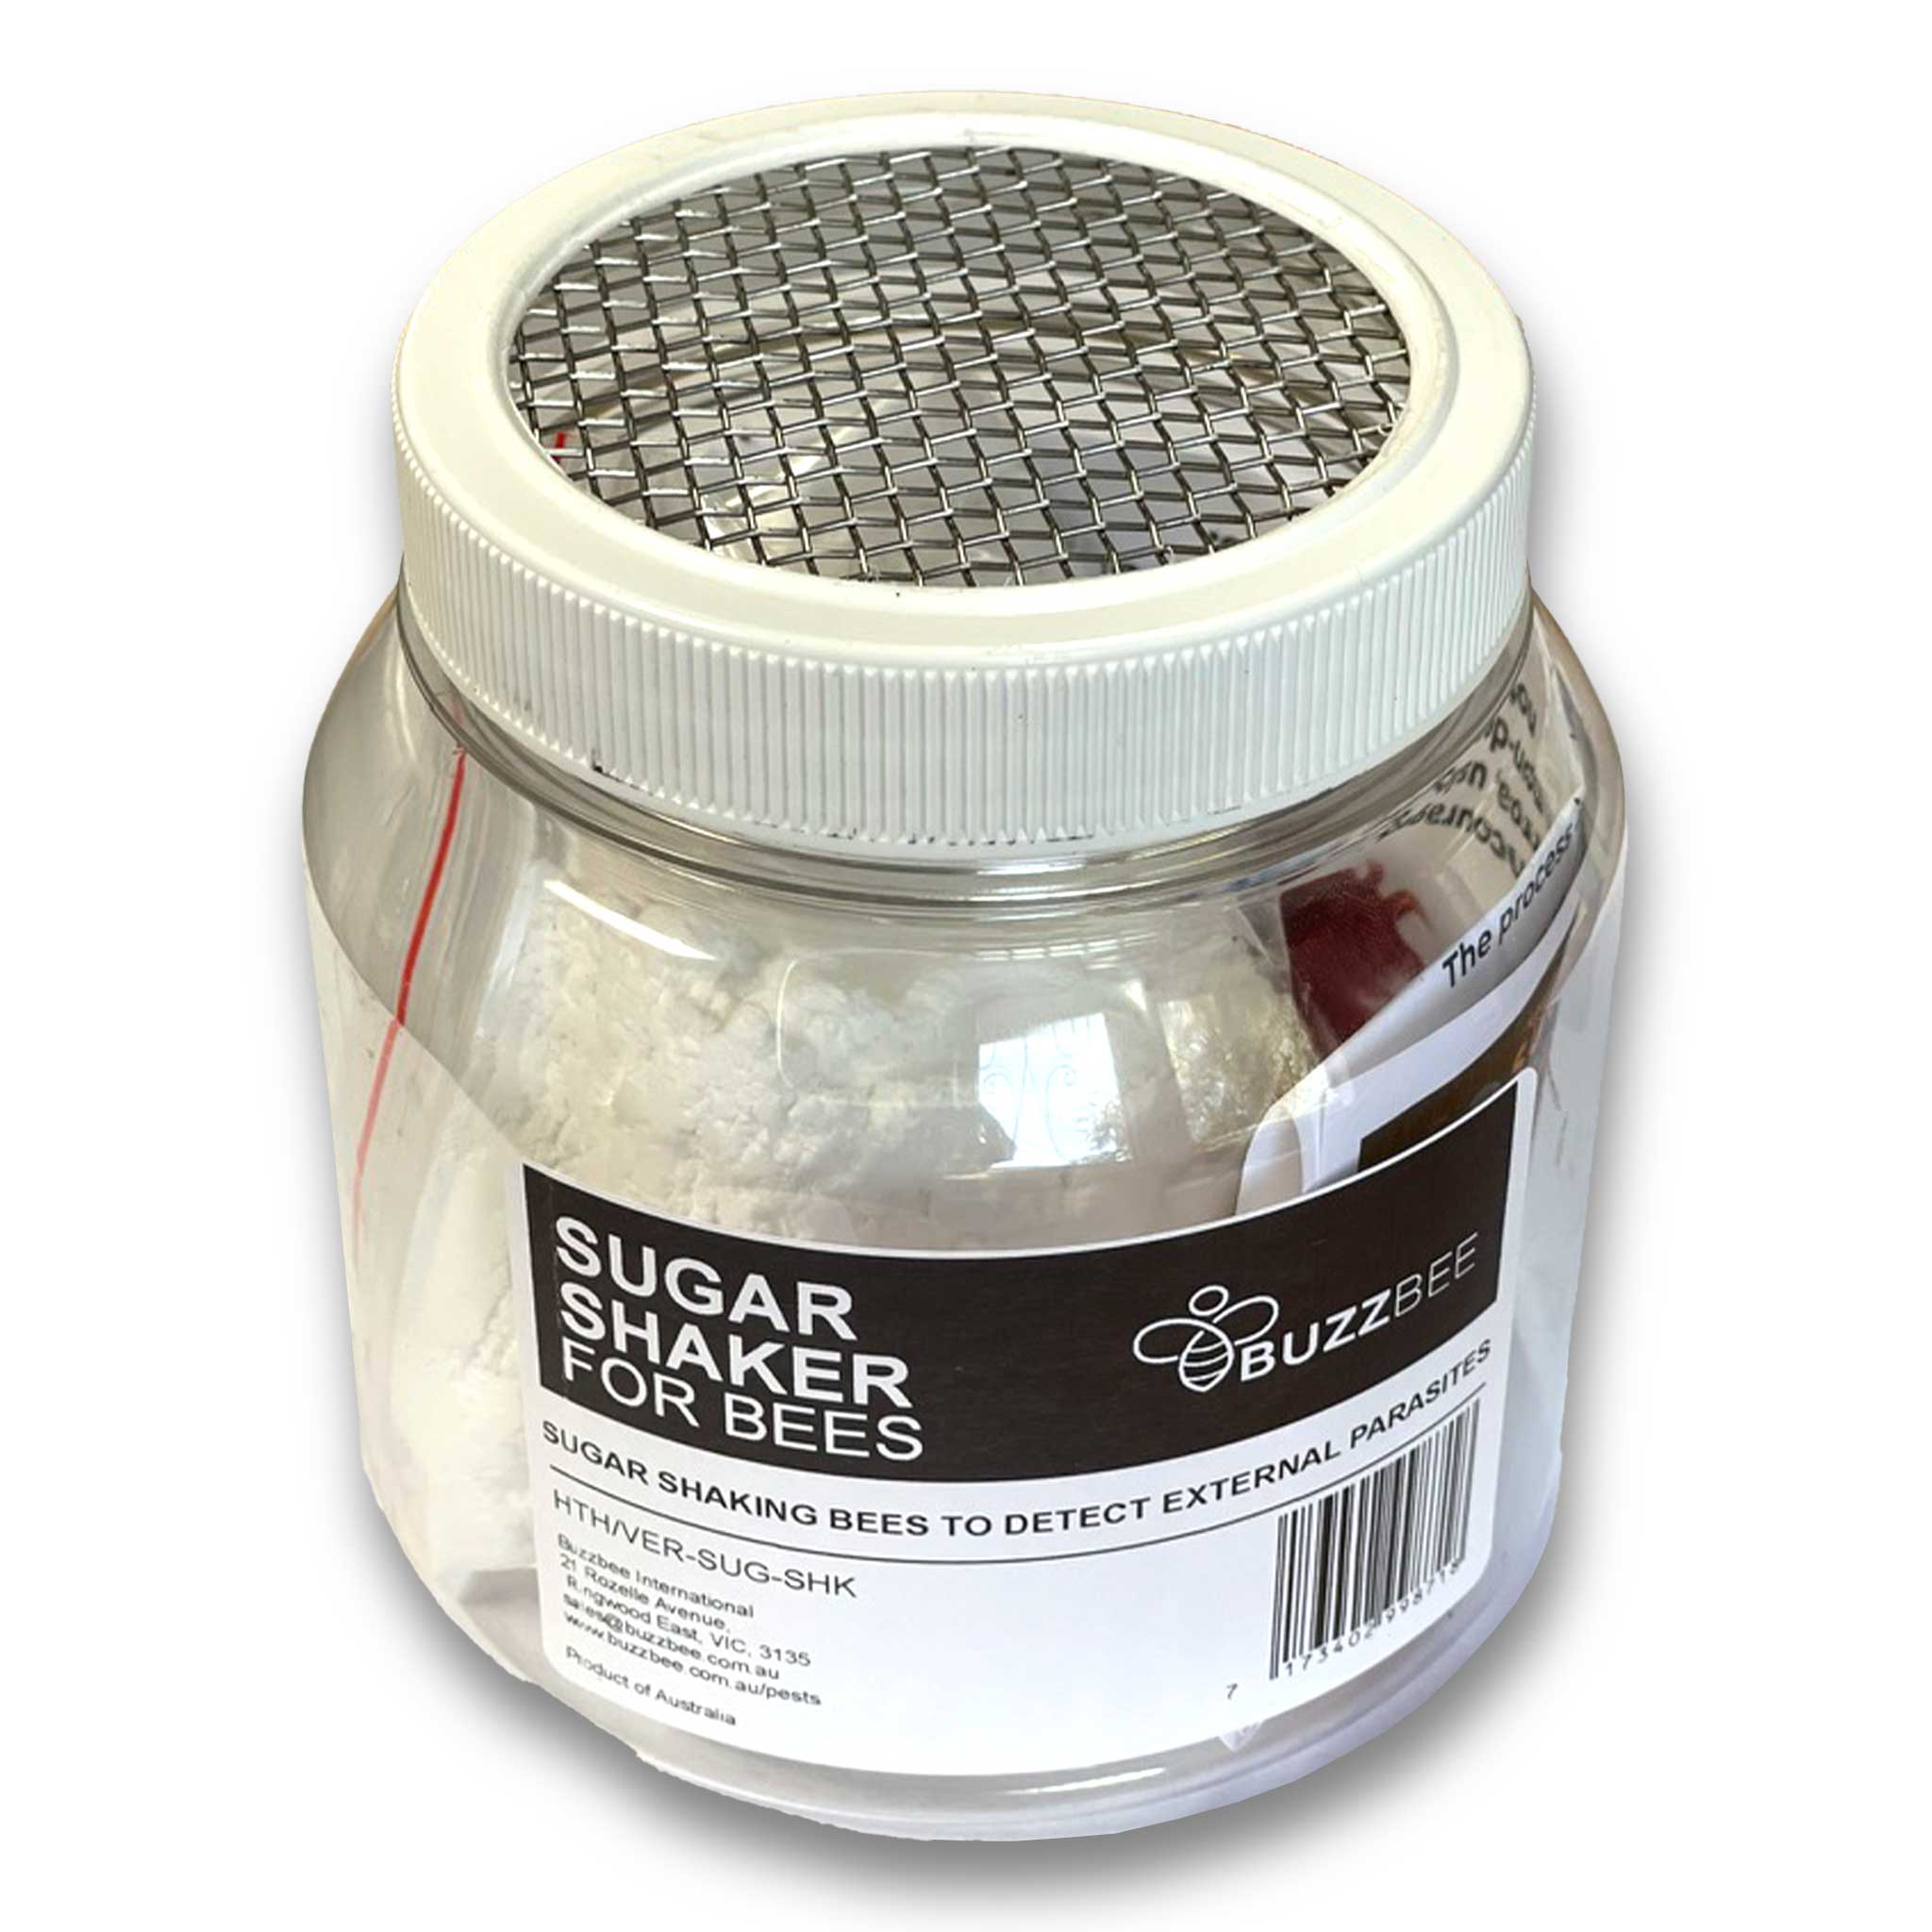 Sugar Shaker for Detecting External Parasites such as Varroa Mites - Health collection by Buzzbee Beekeeping Supplies